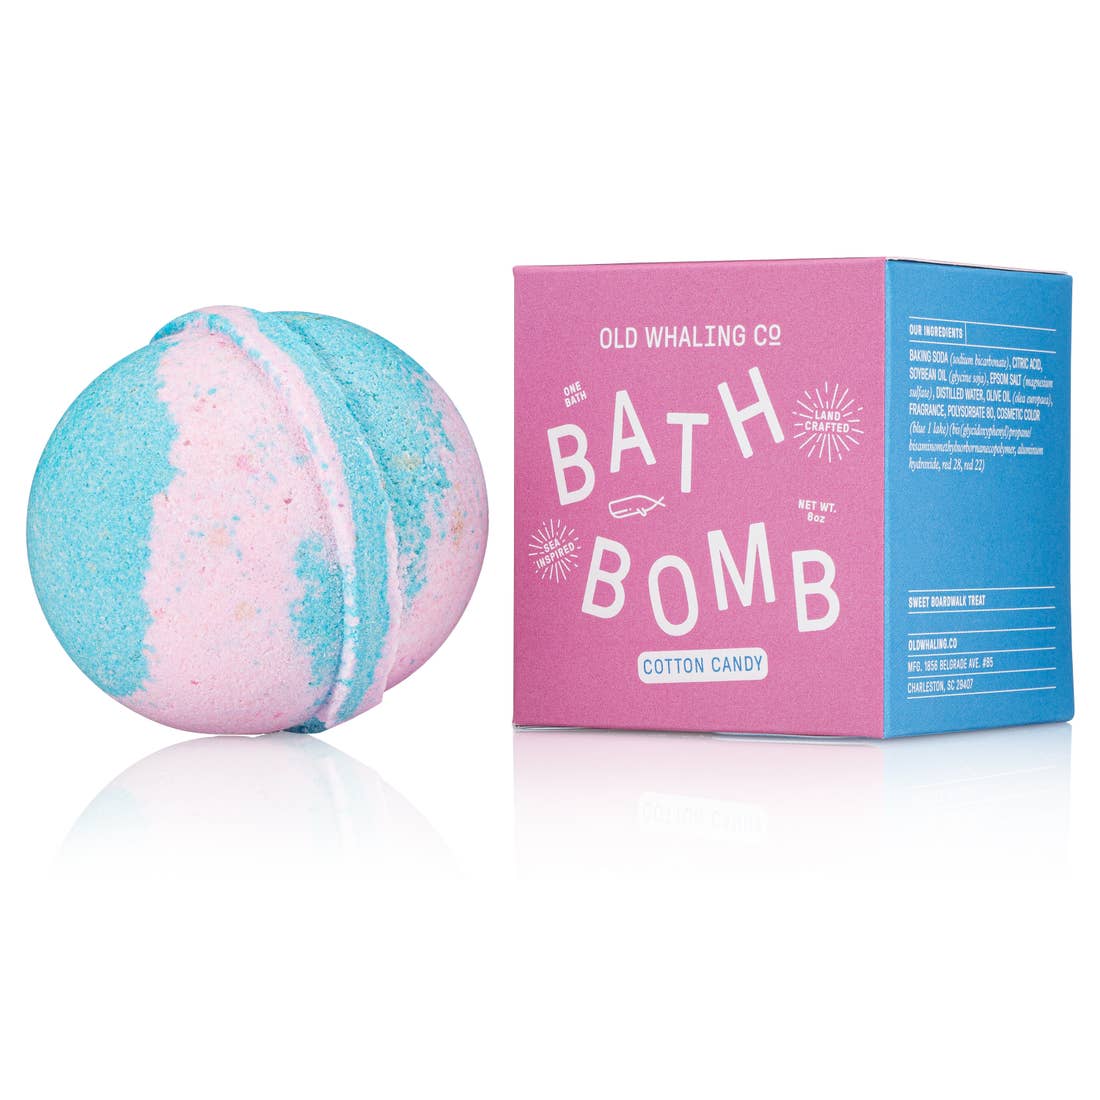 Cotton Candy Bath Bomb with Box